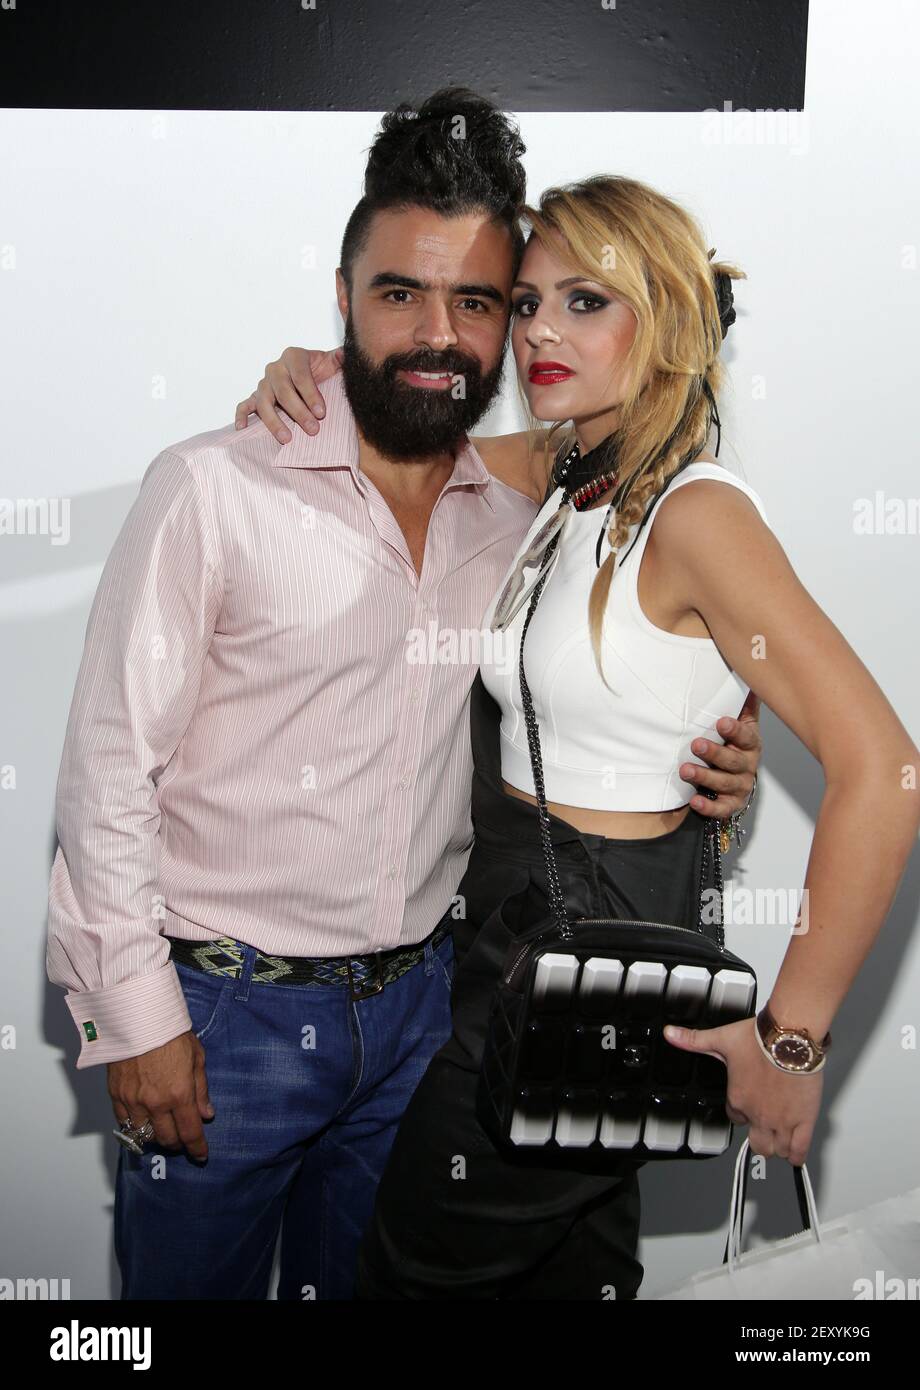 A.Z. Araujo and Andrea Salomone attend the A.Z. Araujo show during  Mercedes-Benz Fashion Week Swim 2015 at Oasis at the Raleigh on July 21,  2014 in Miami, Florida. ( Photo by Alberto